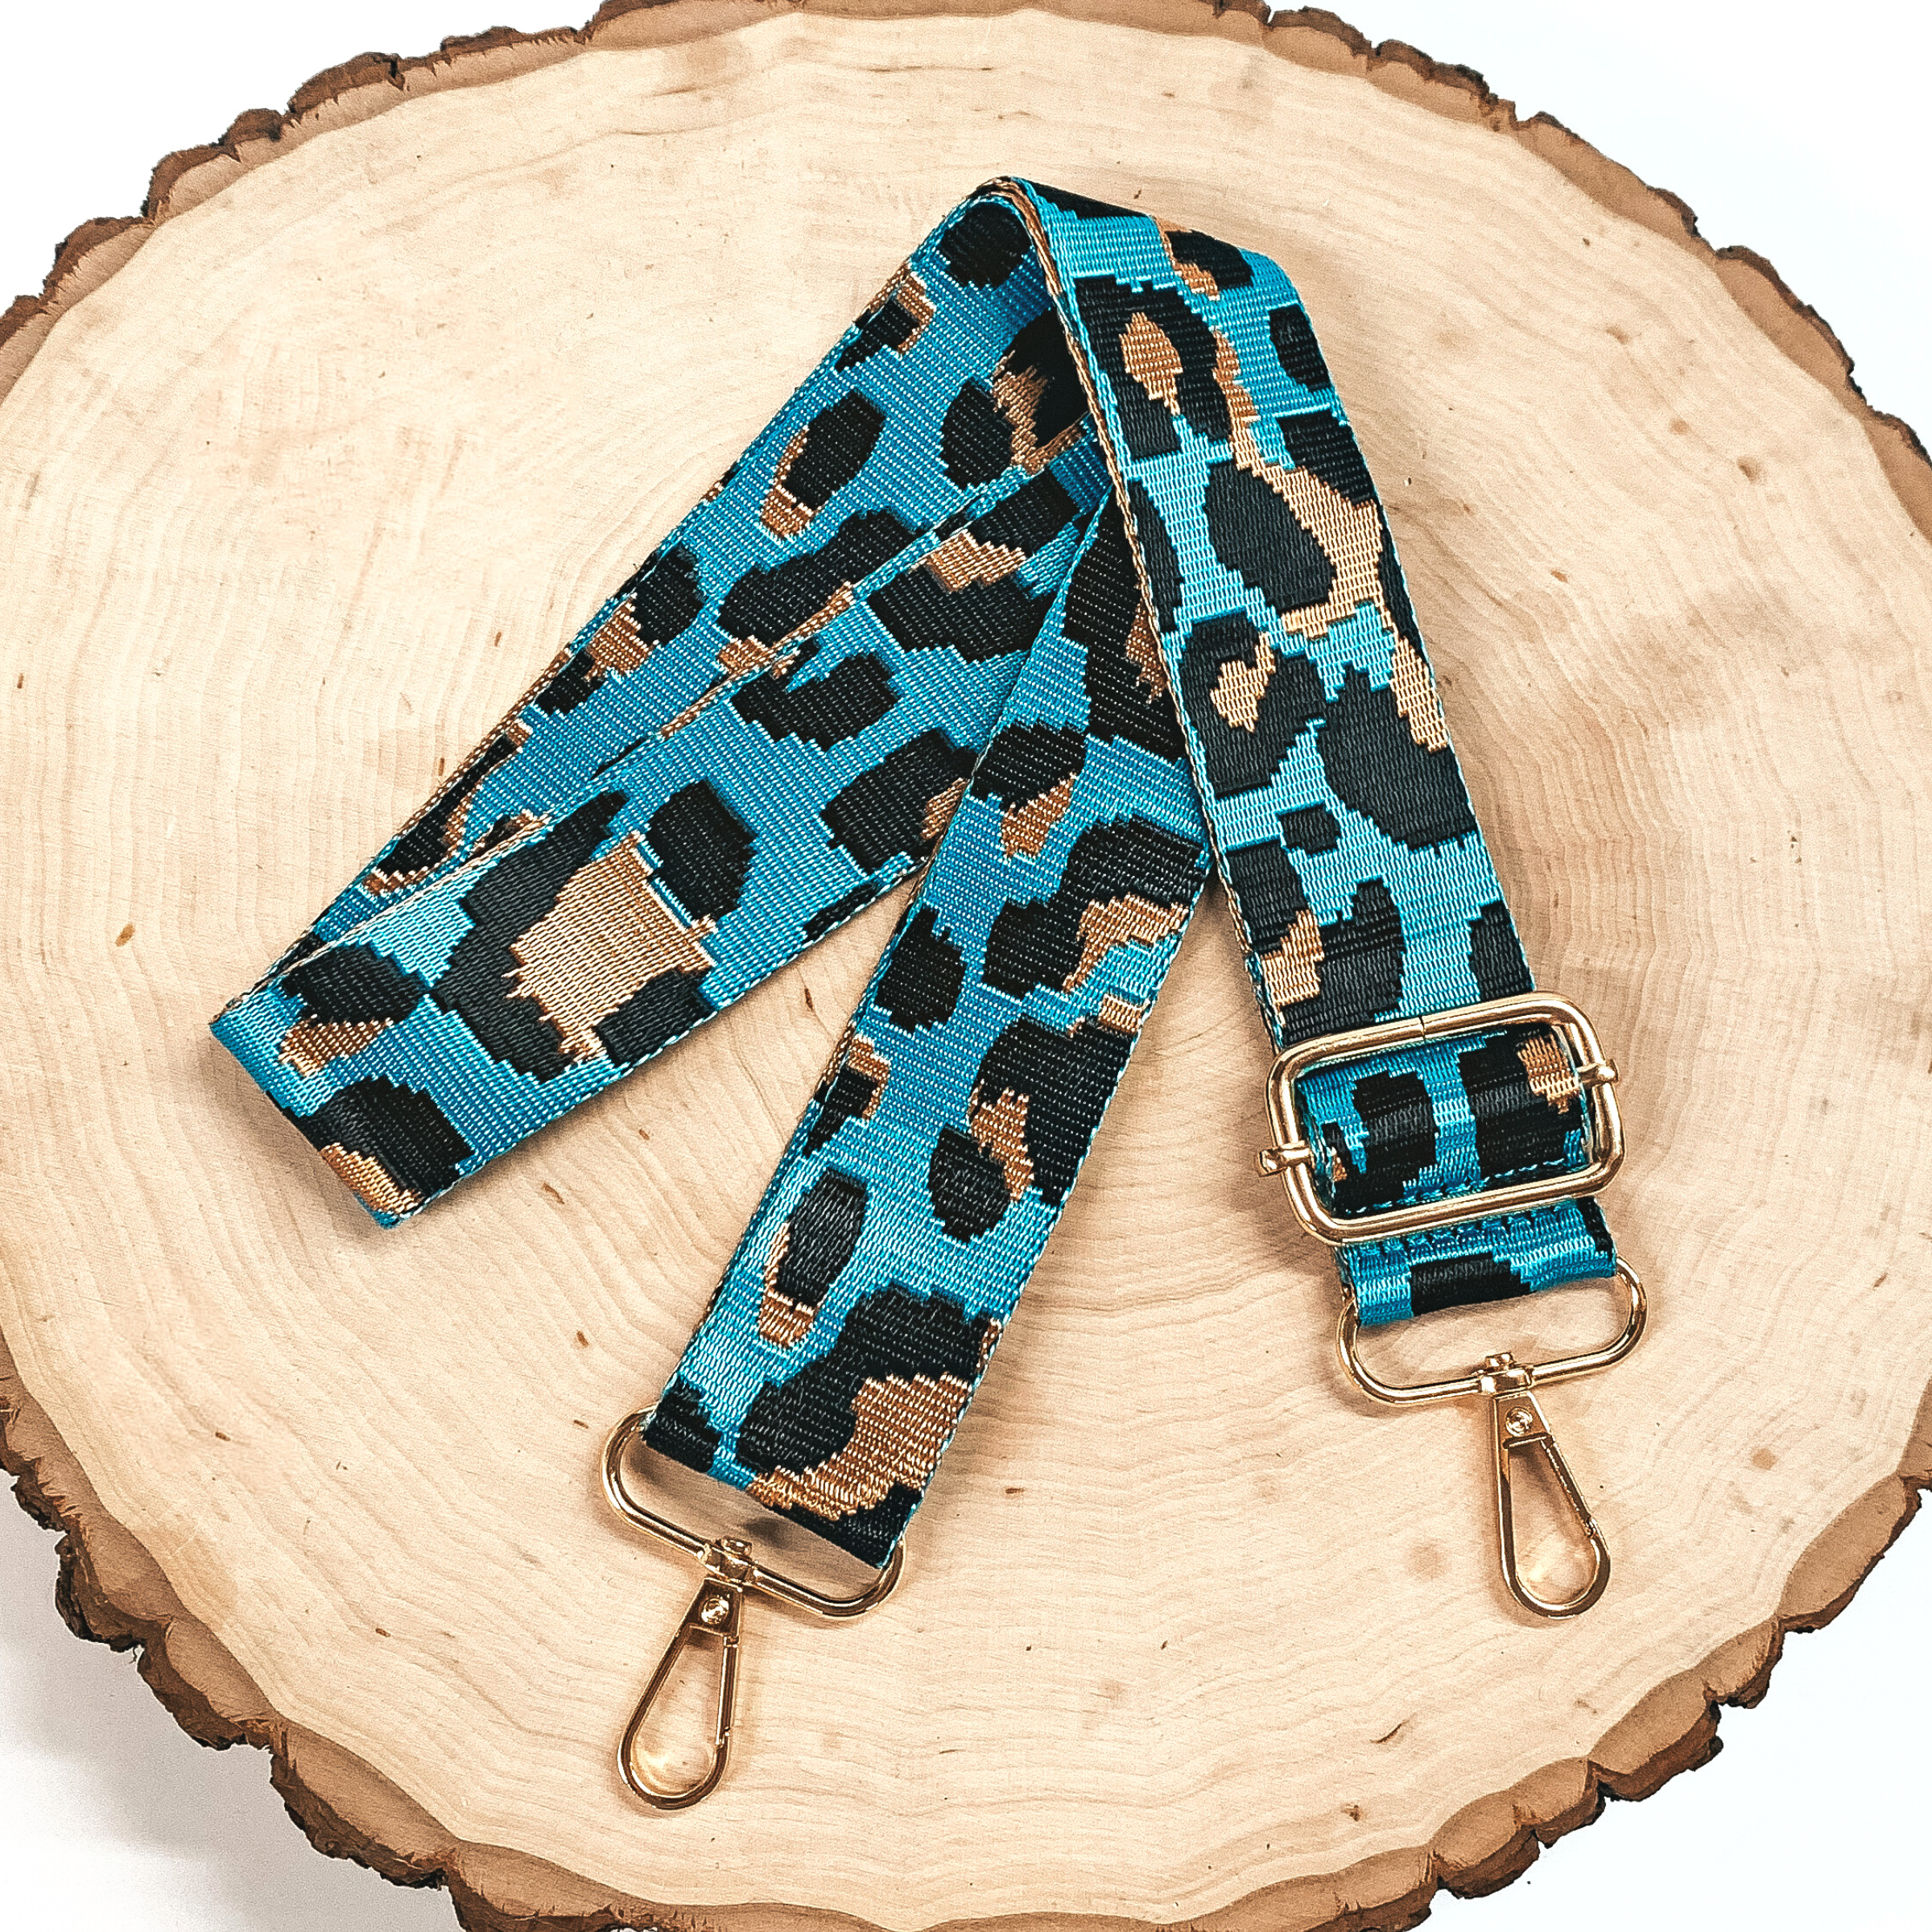 Thin Leopard Print Adjustable Purse Strap in Turquoise, Gold, and Black - Giddy Up Glamour Boutique